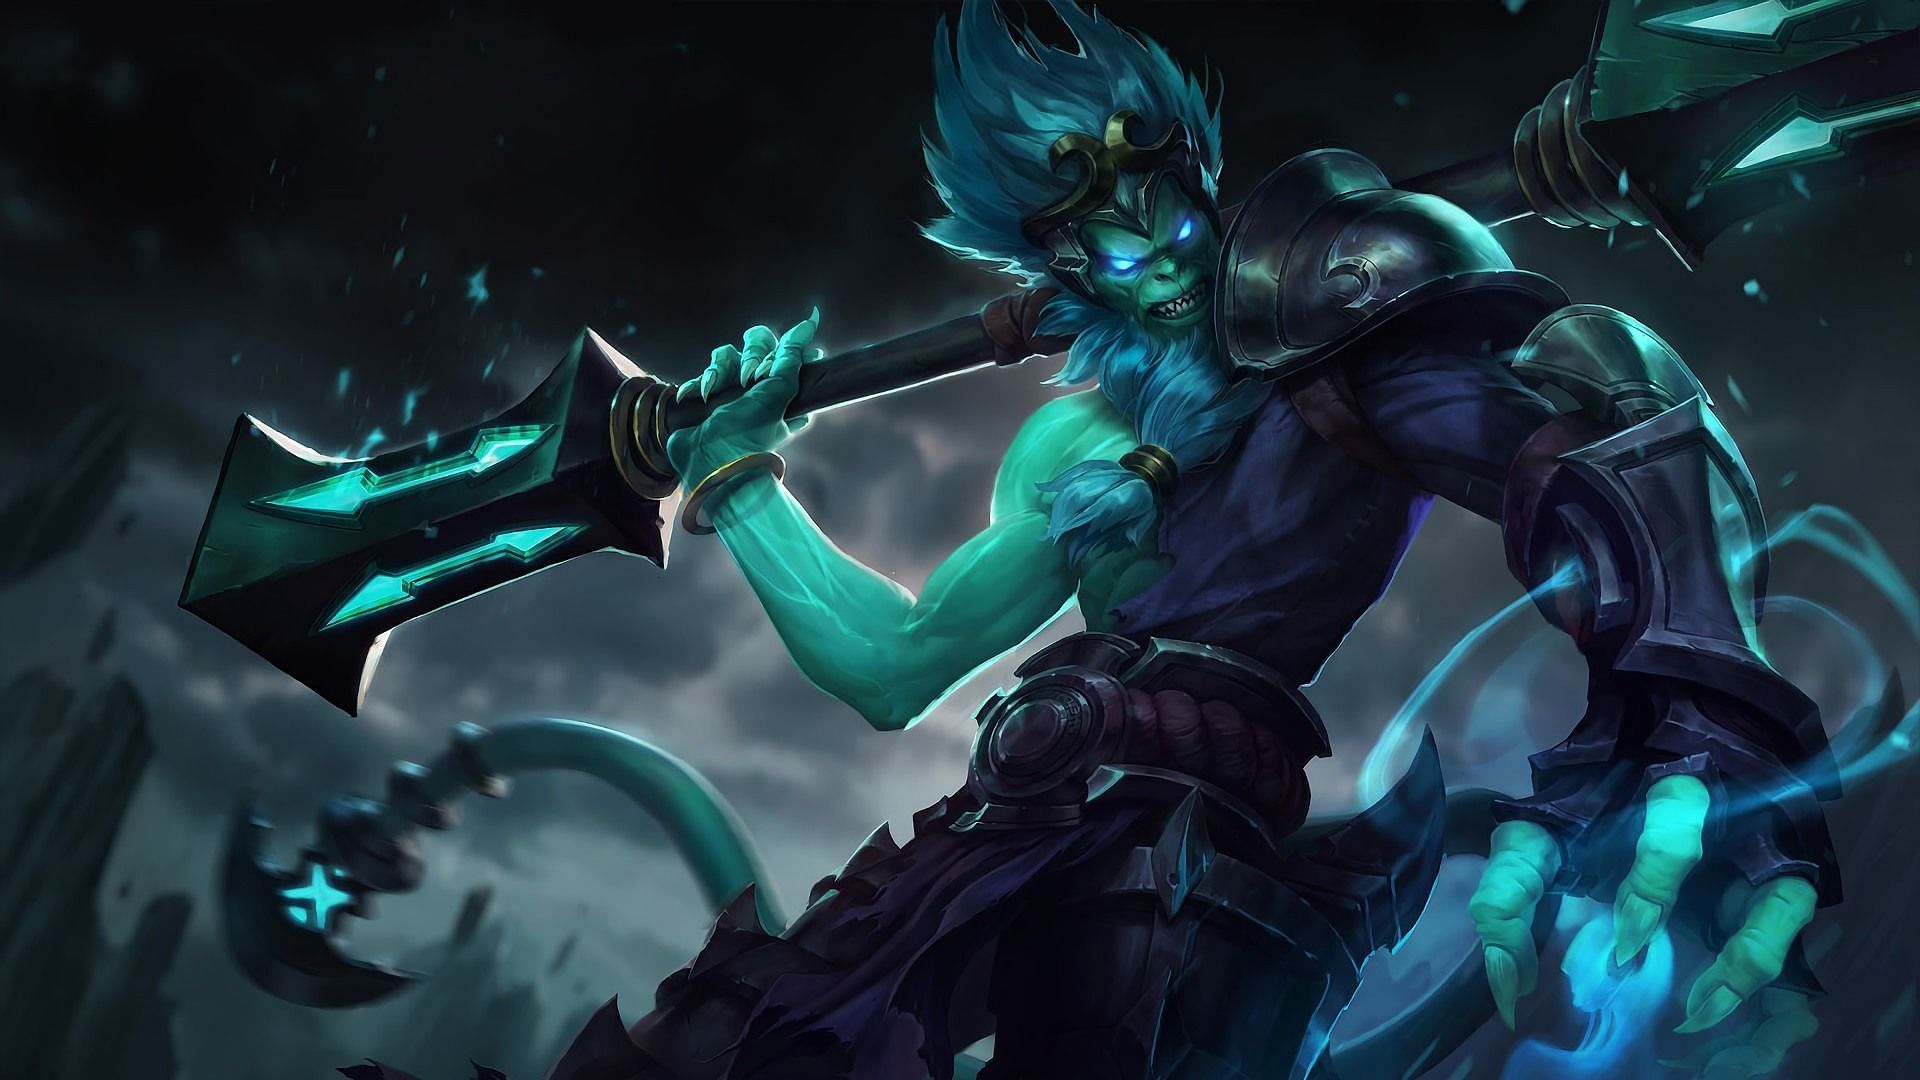 Wukong (Underworld Wukong) is the solution for today&#039;s LoLdle Splash Art (Image via Riot Games - League of Legends)